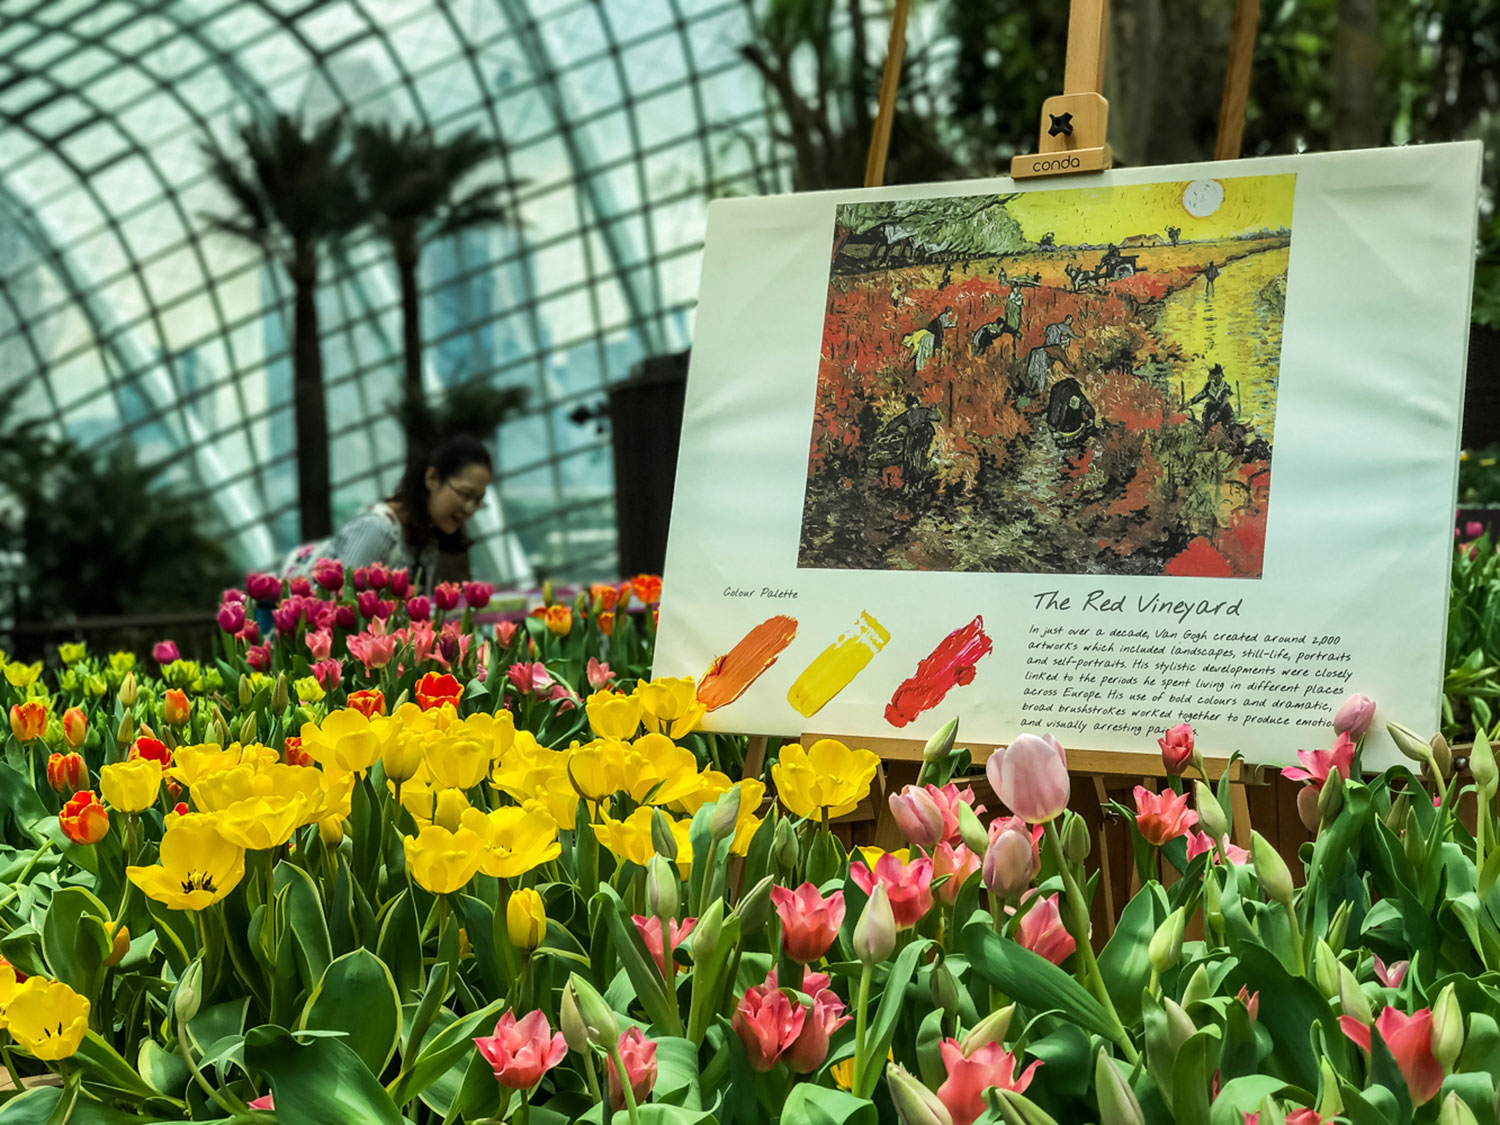 Tulipmania Inspired at Gardens by the Bay Flower Dome